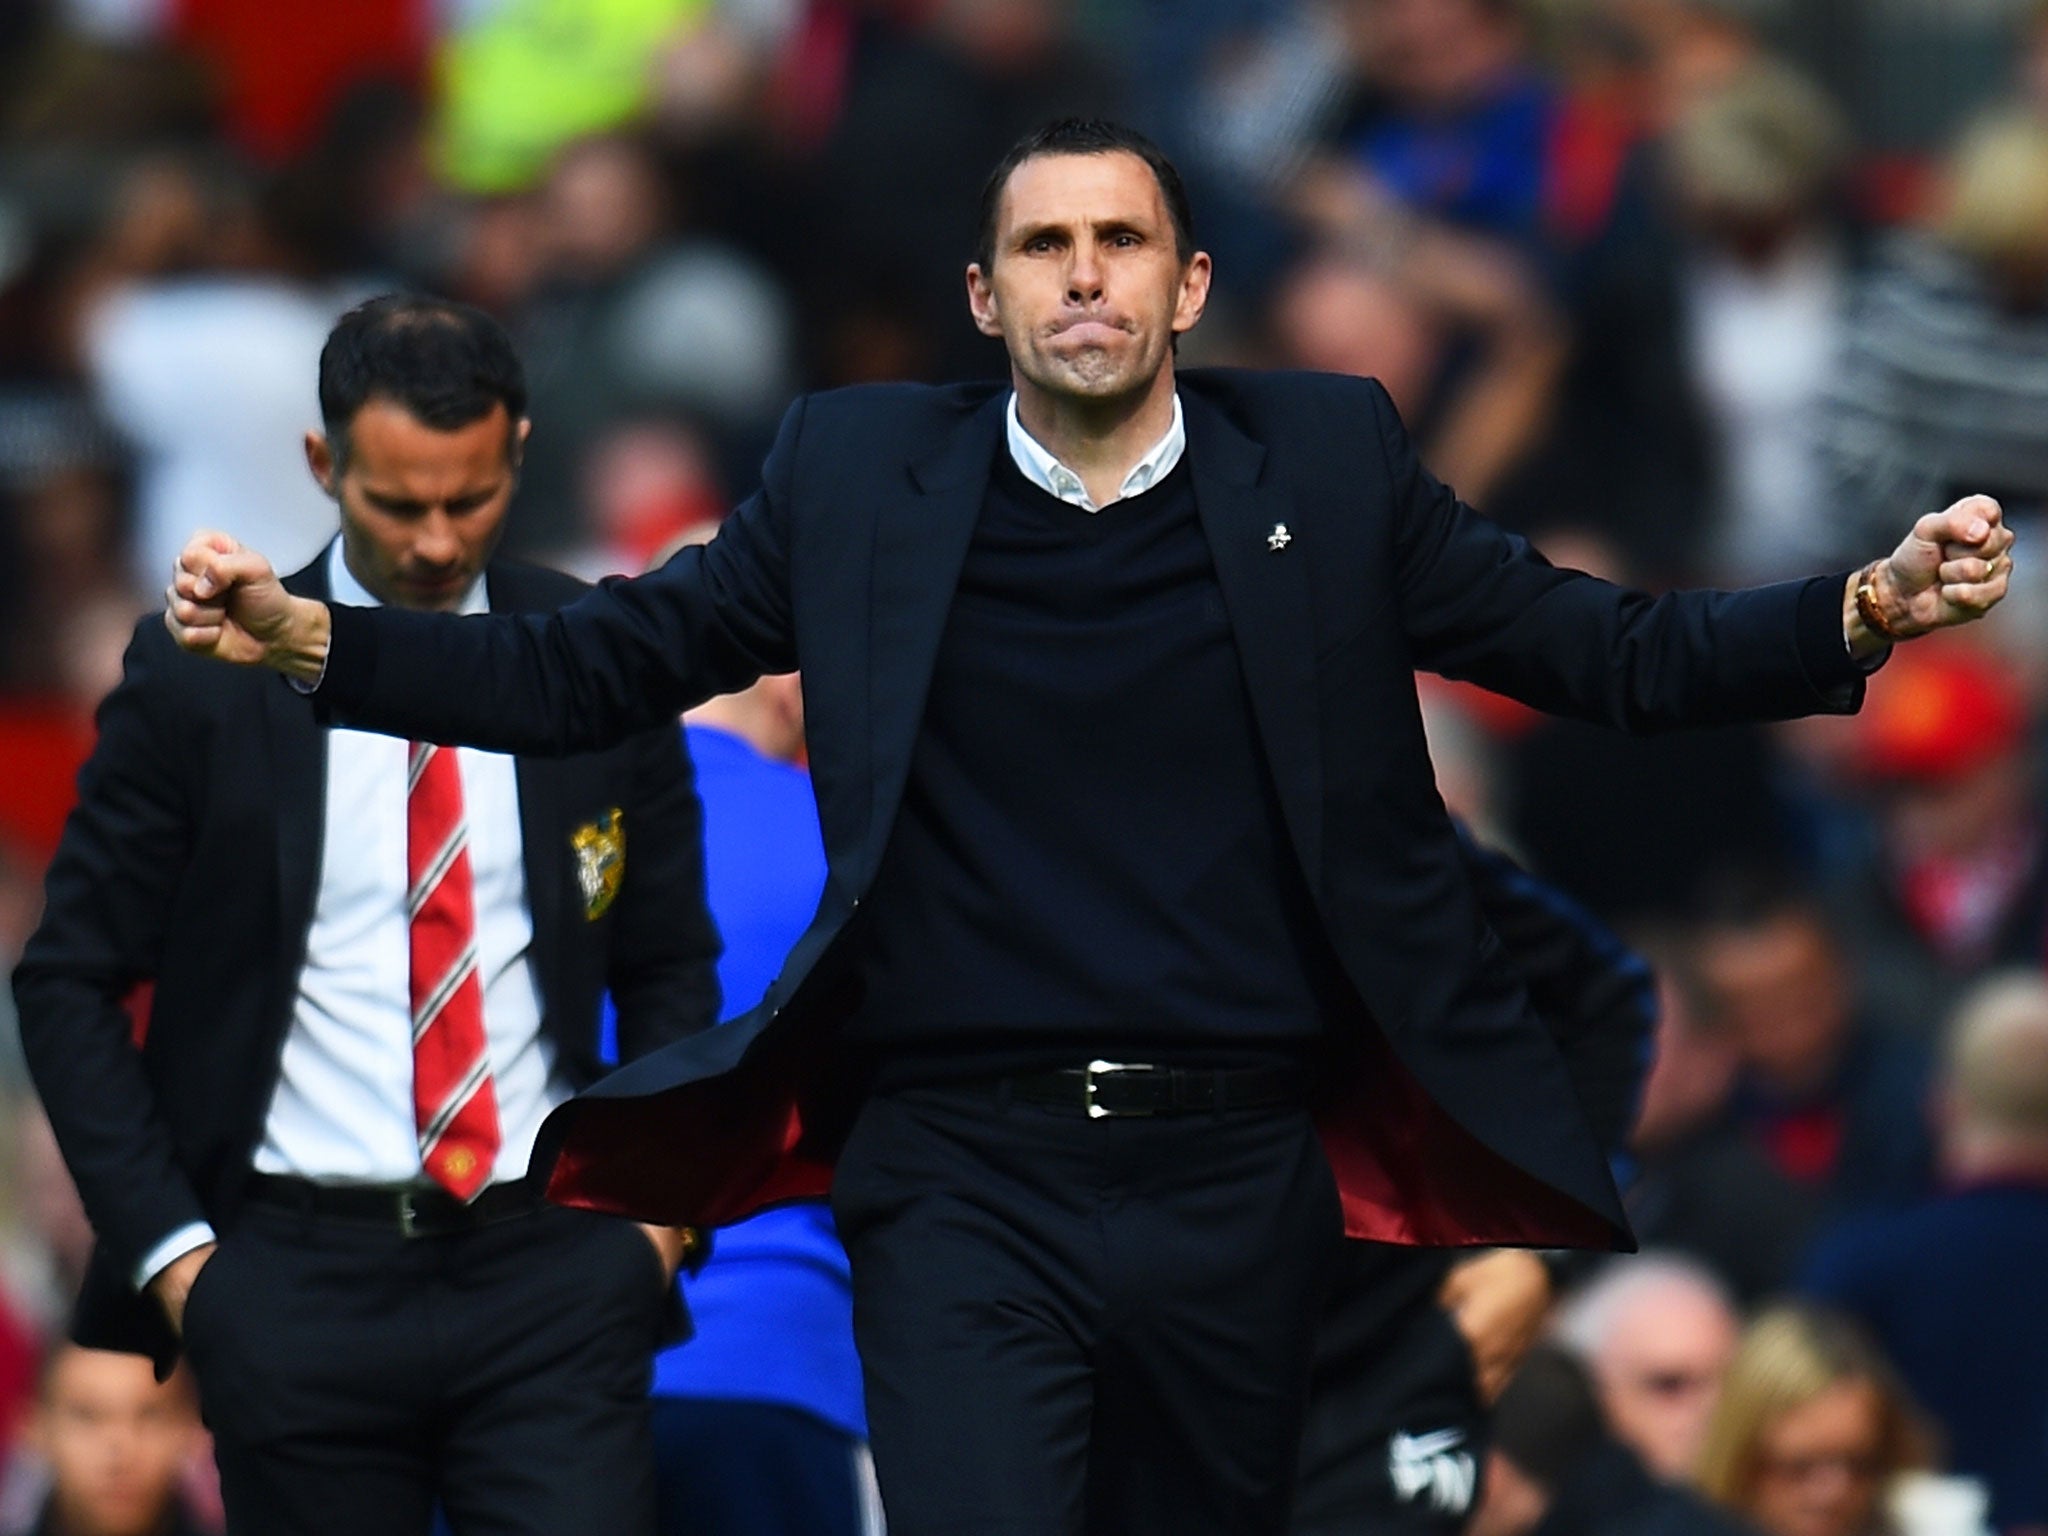 Sunderland manager Gus Poyet celebrates in front of a downcast Ryan Giggs